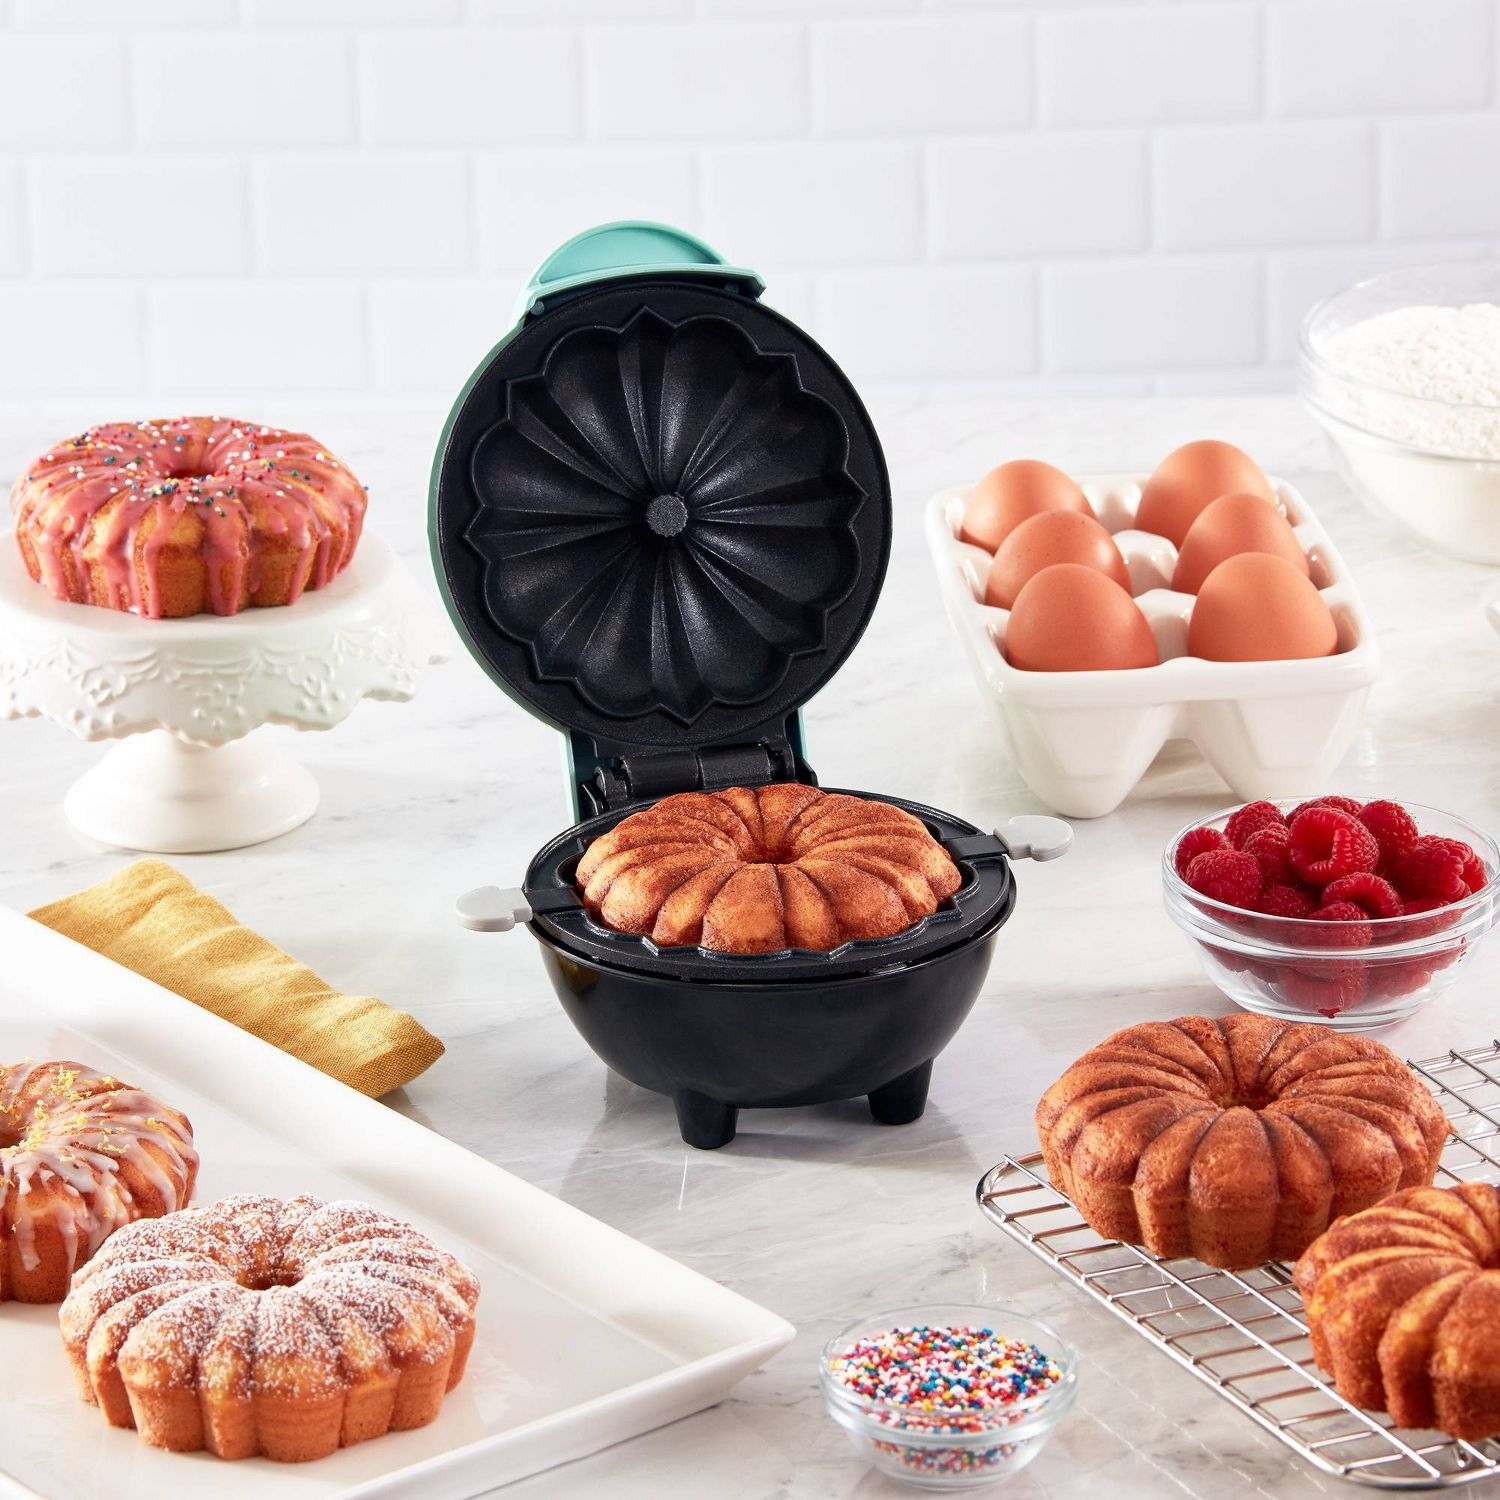 The bundt pan with a cake inside it